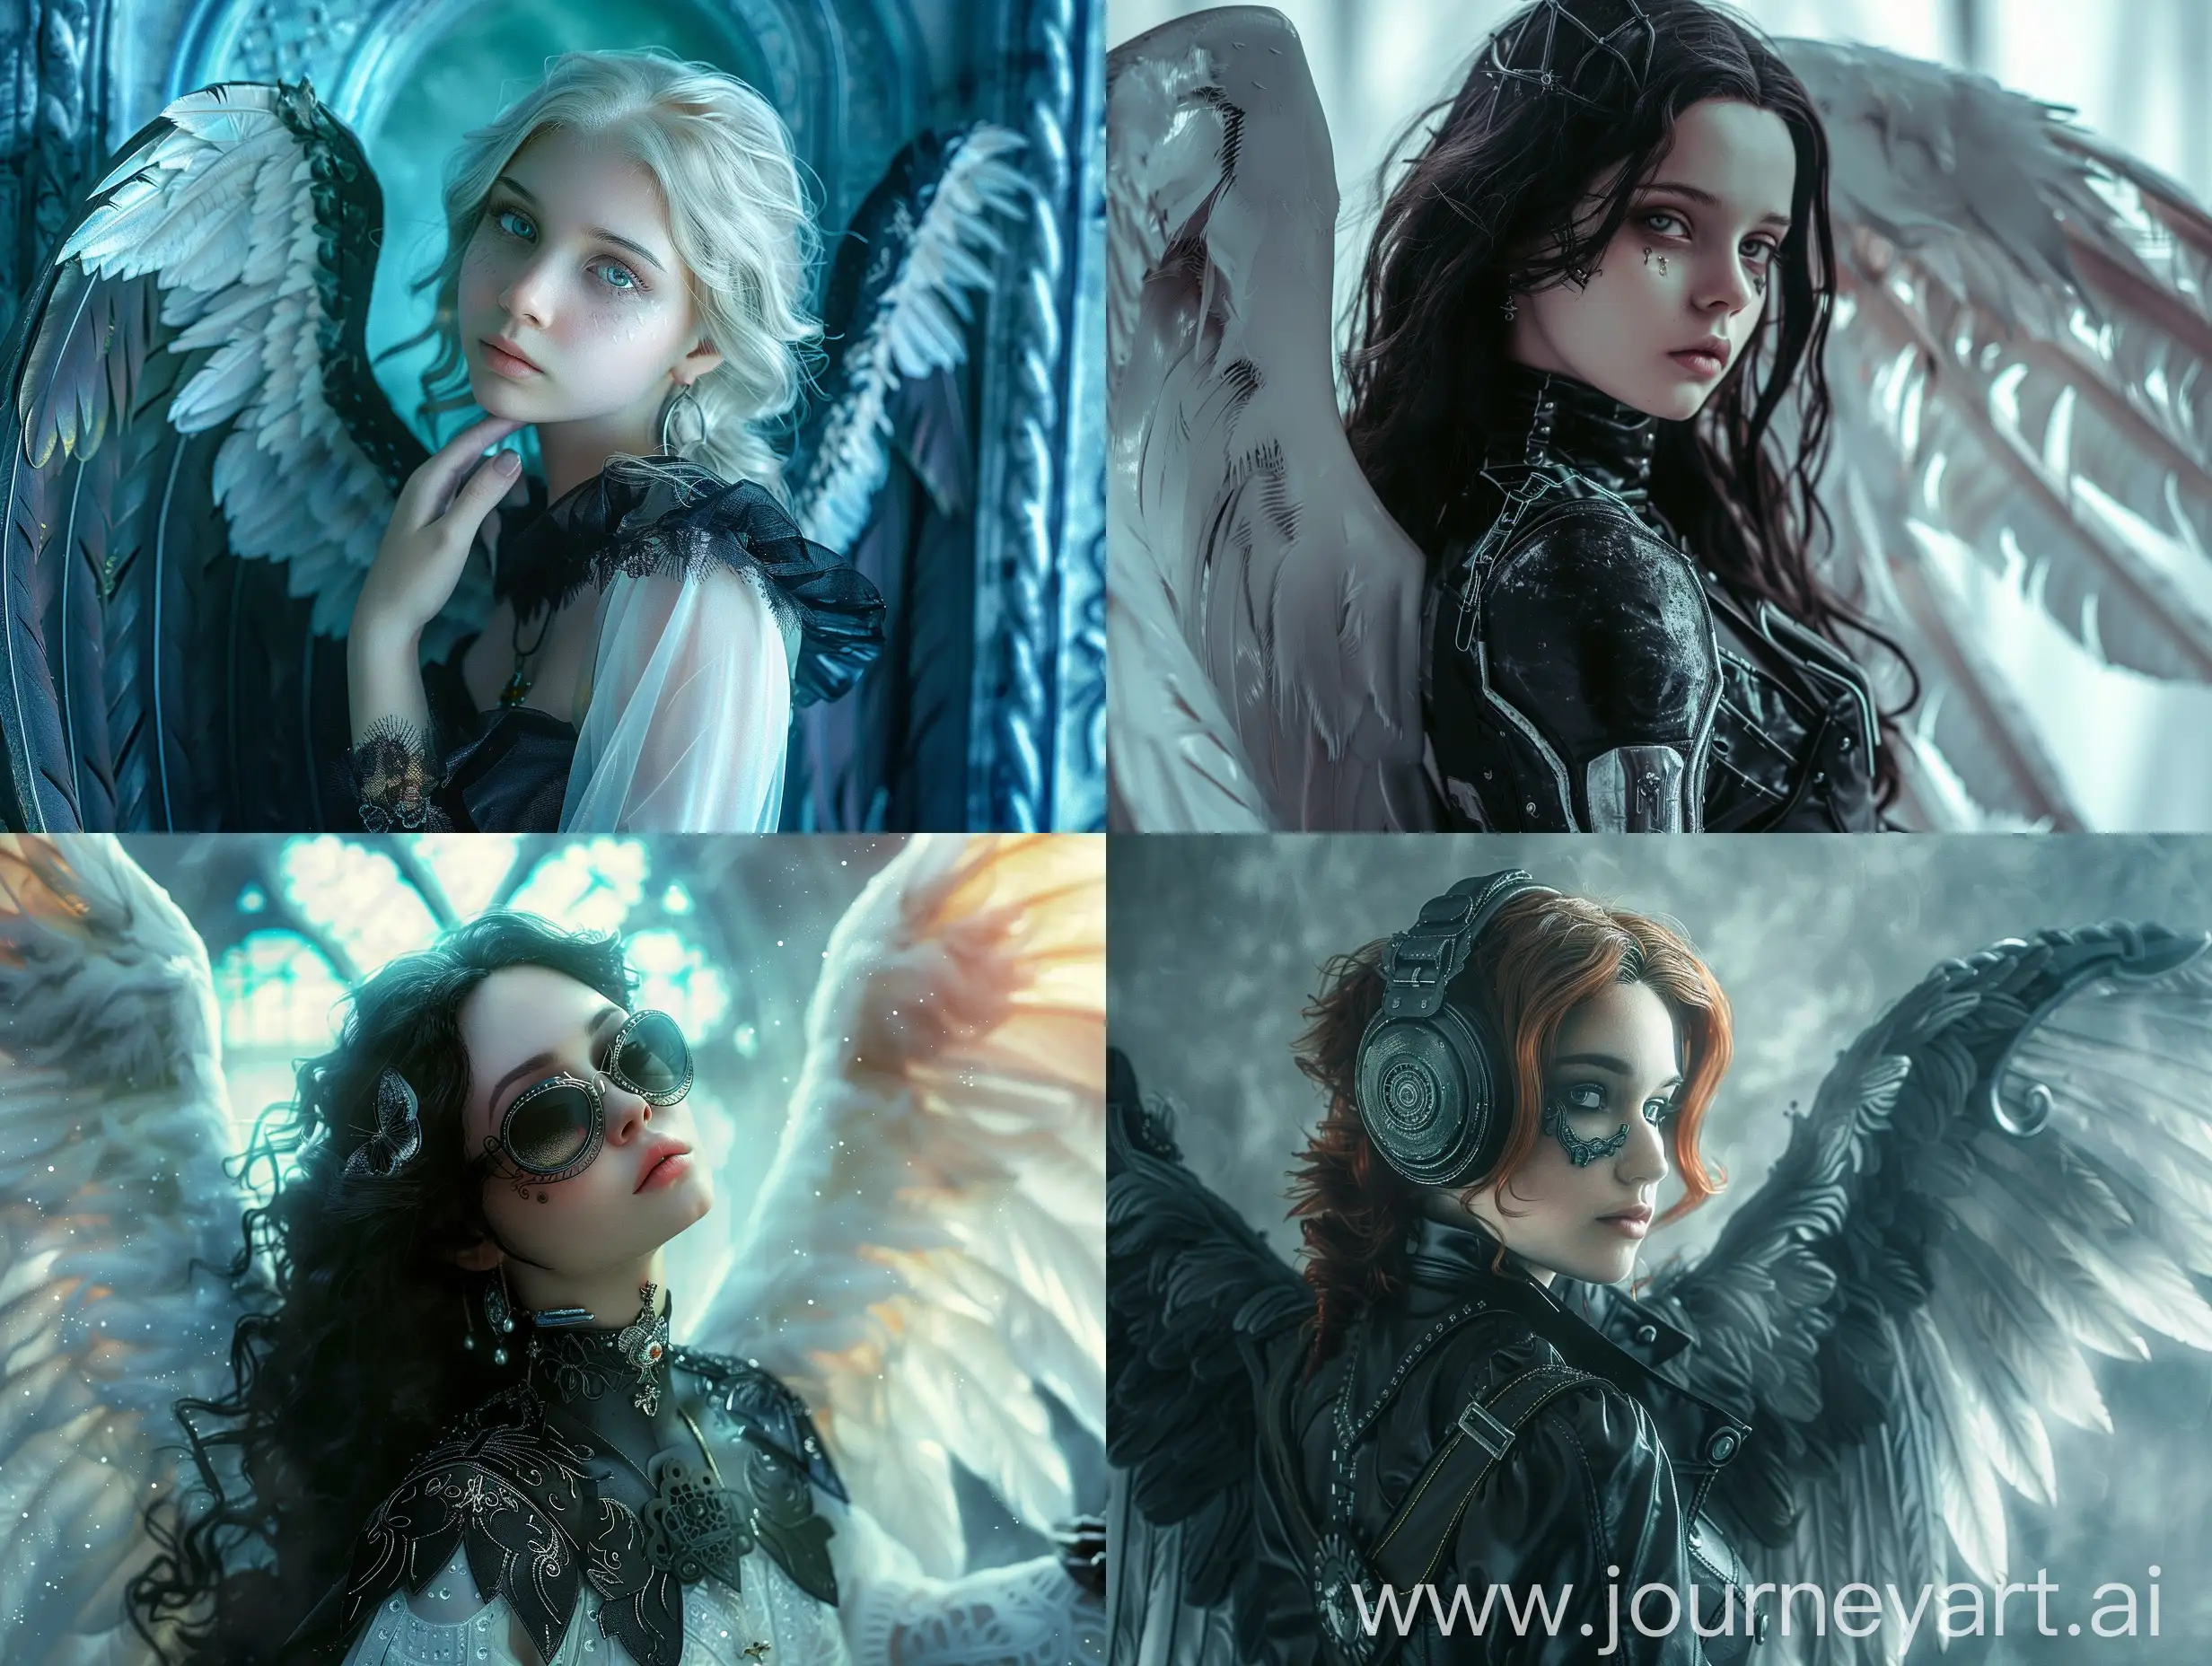 Angelic-Cyberpunk-Realism-Gothic-Pop-Surrealism-Portraits-in-Dreamscape-Space-Opera-Style